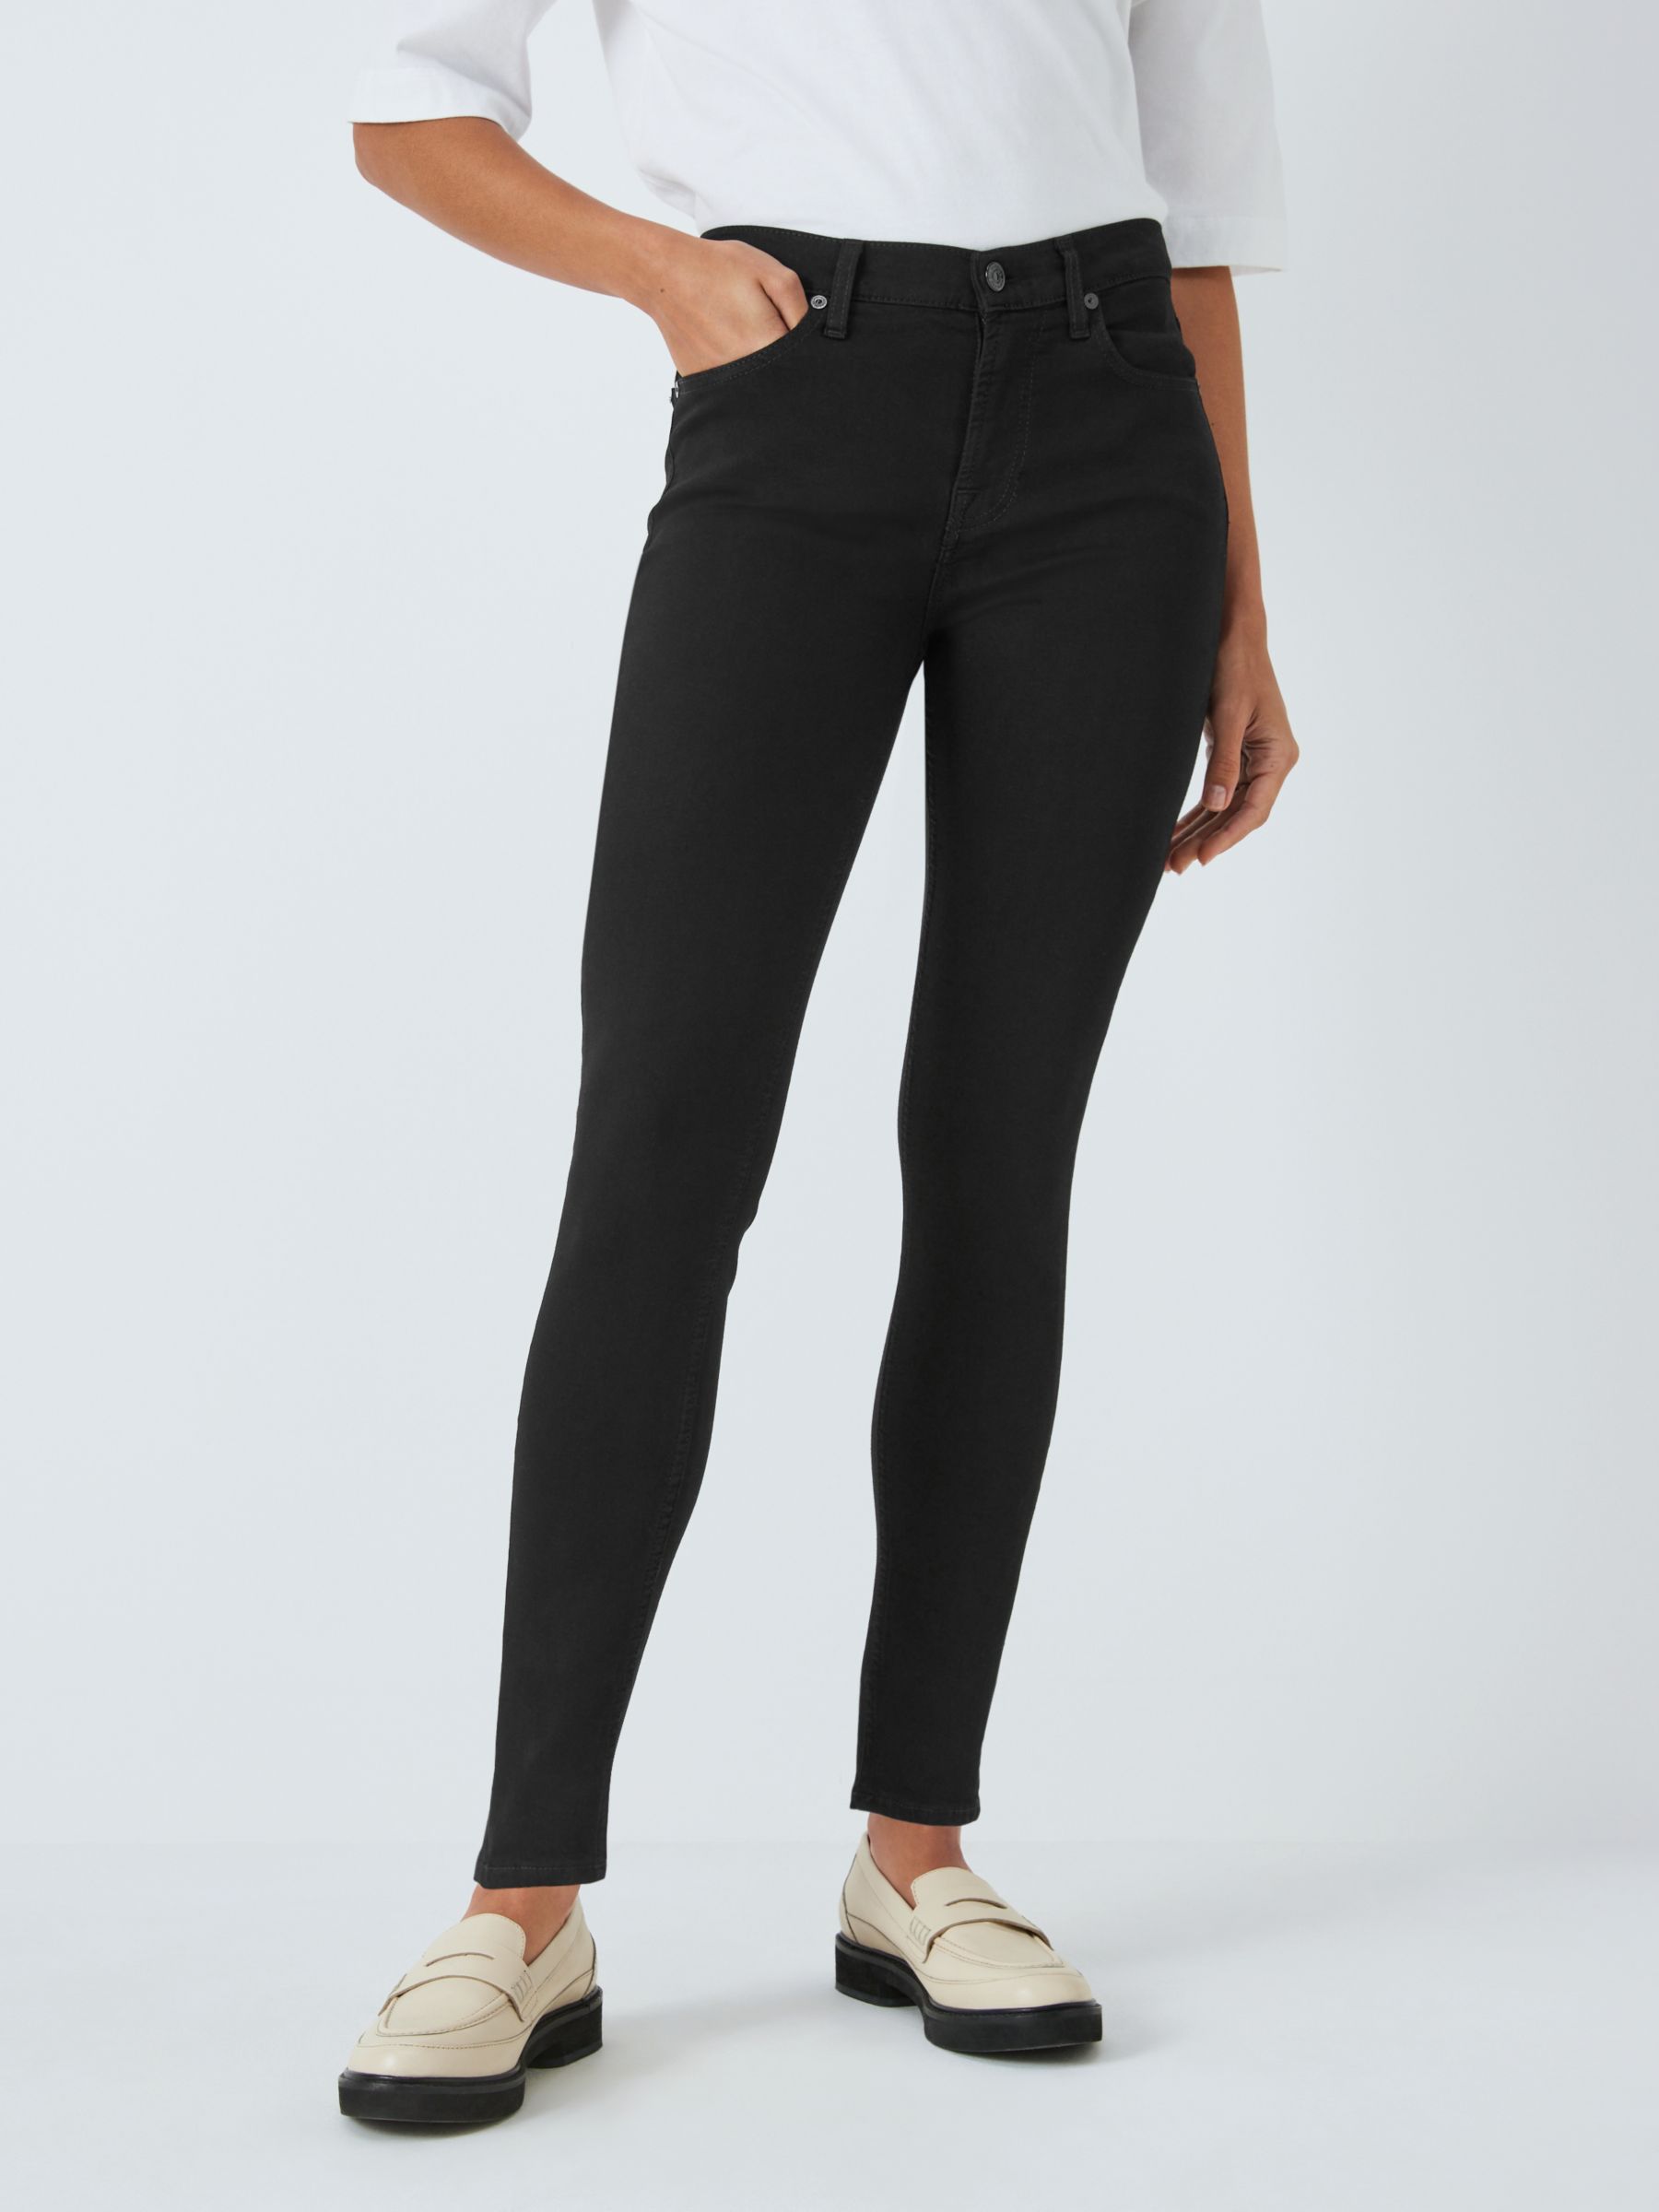 7 For All Mankind Skinny B(Air) Jeans, Rinsed Black, 24